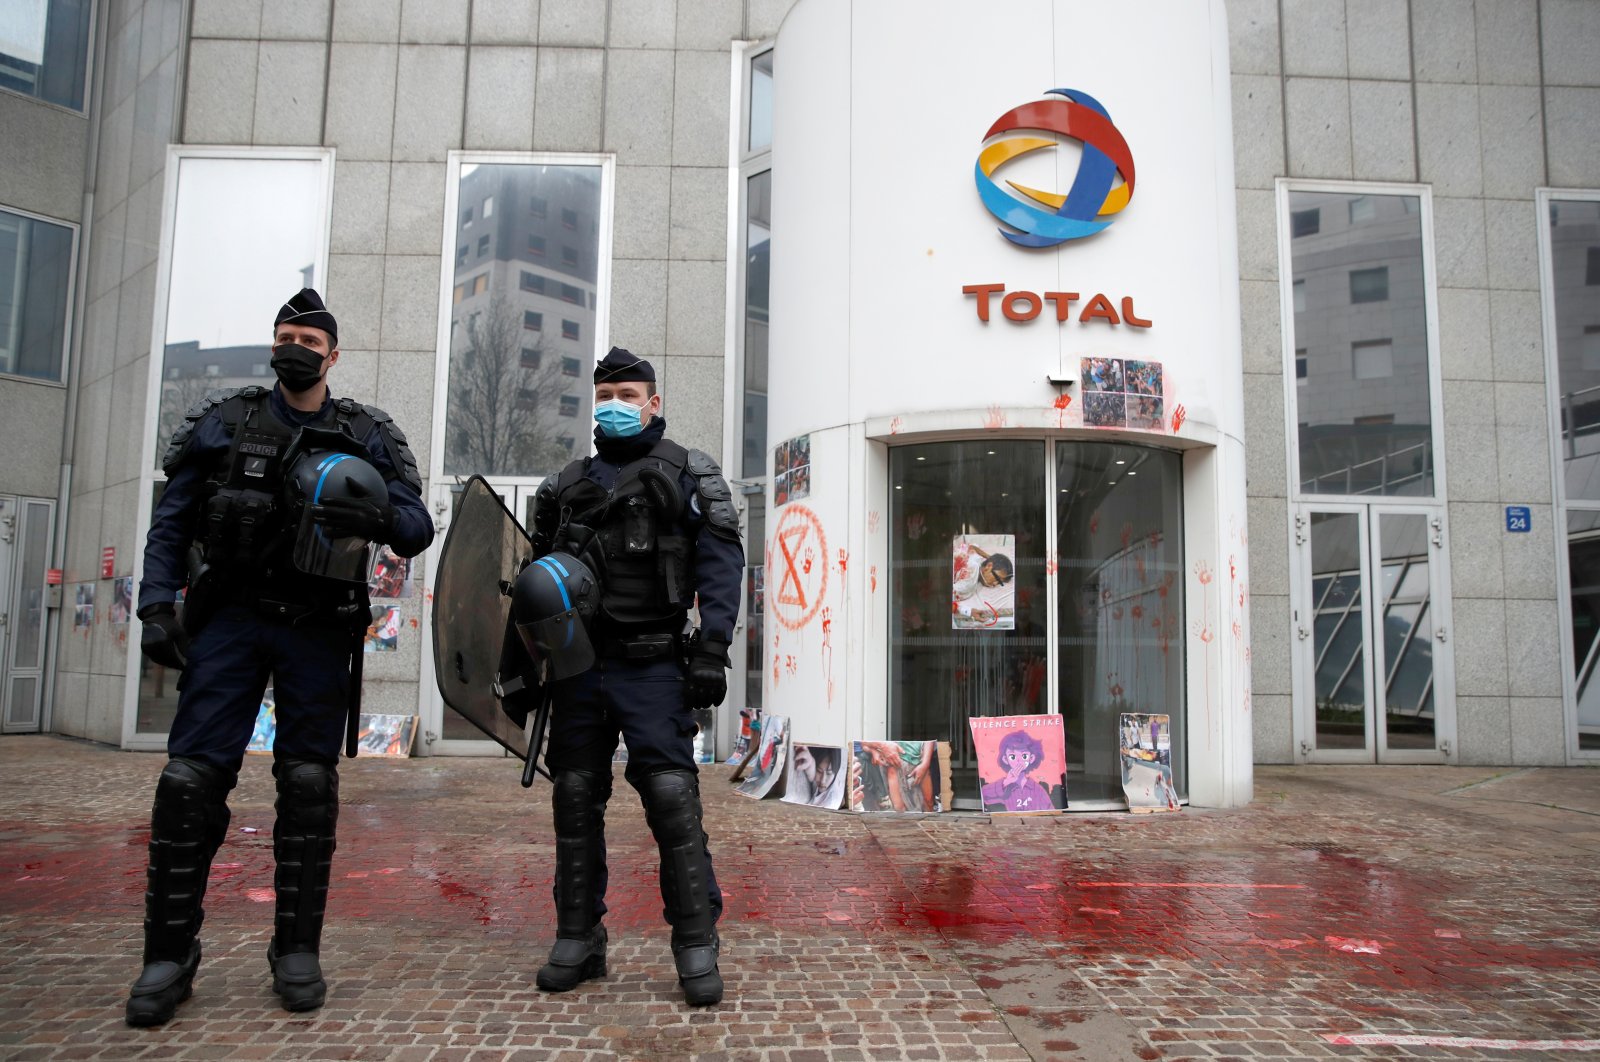 Police stand in front of Total's headquarters after an Extinction Rebellion protest for Myanmar's military coup victims, in La Defense business district, near Paris, France, March 25, 2021. (Reuters Photo)